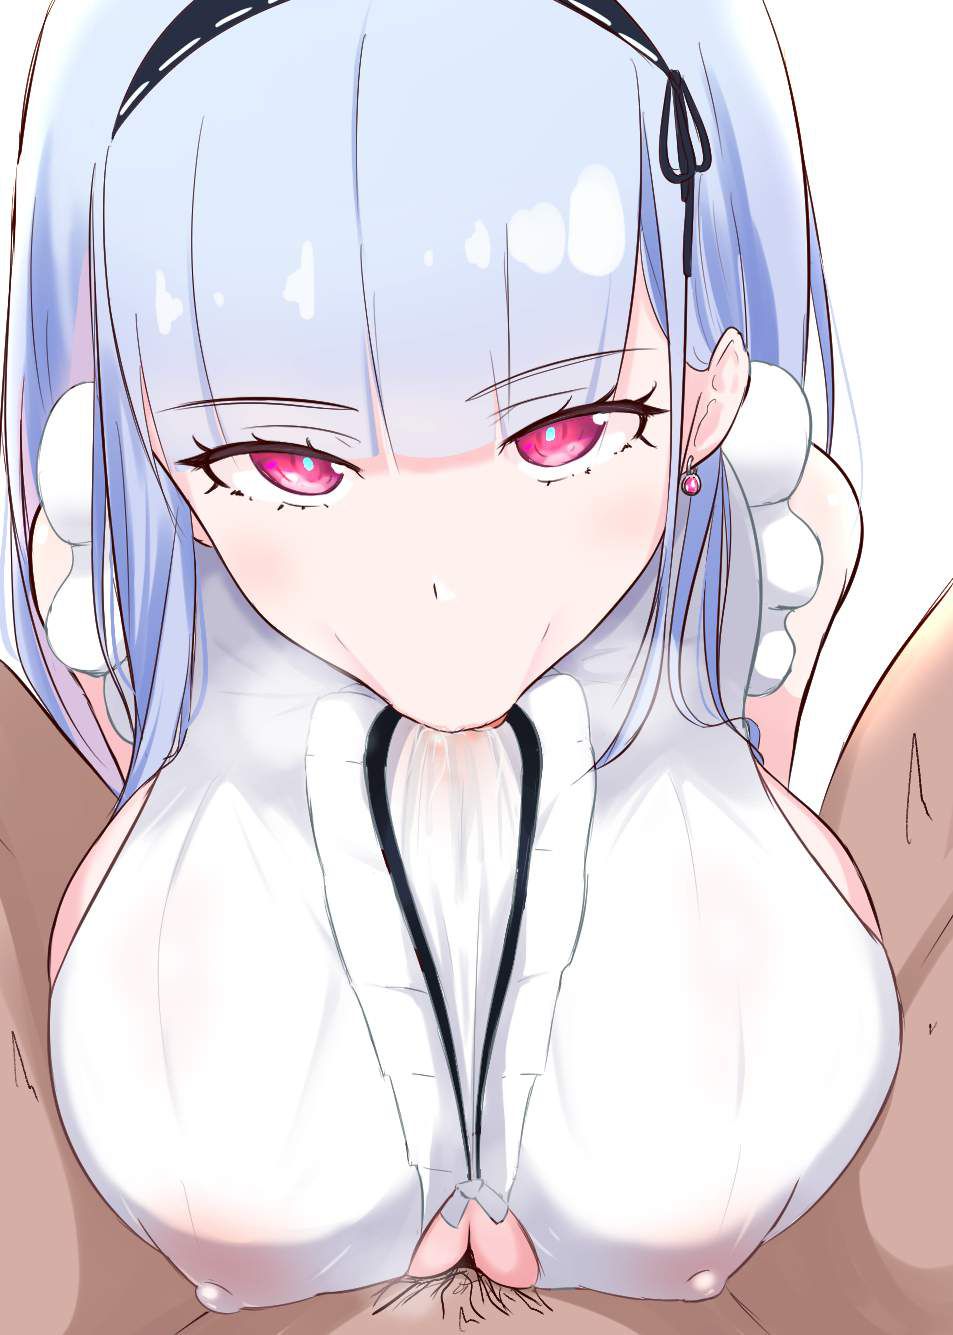 Iddo's as much as you like and all you can do is go to secondary erotic images [Azure Lane] 19